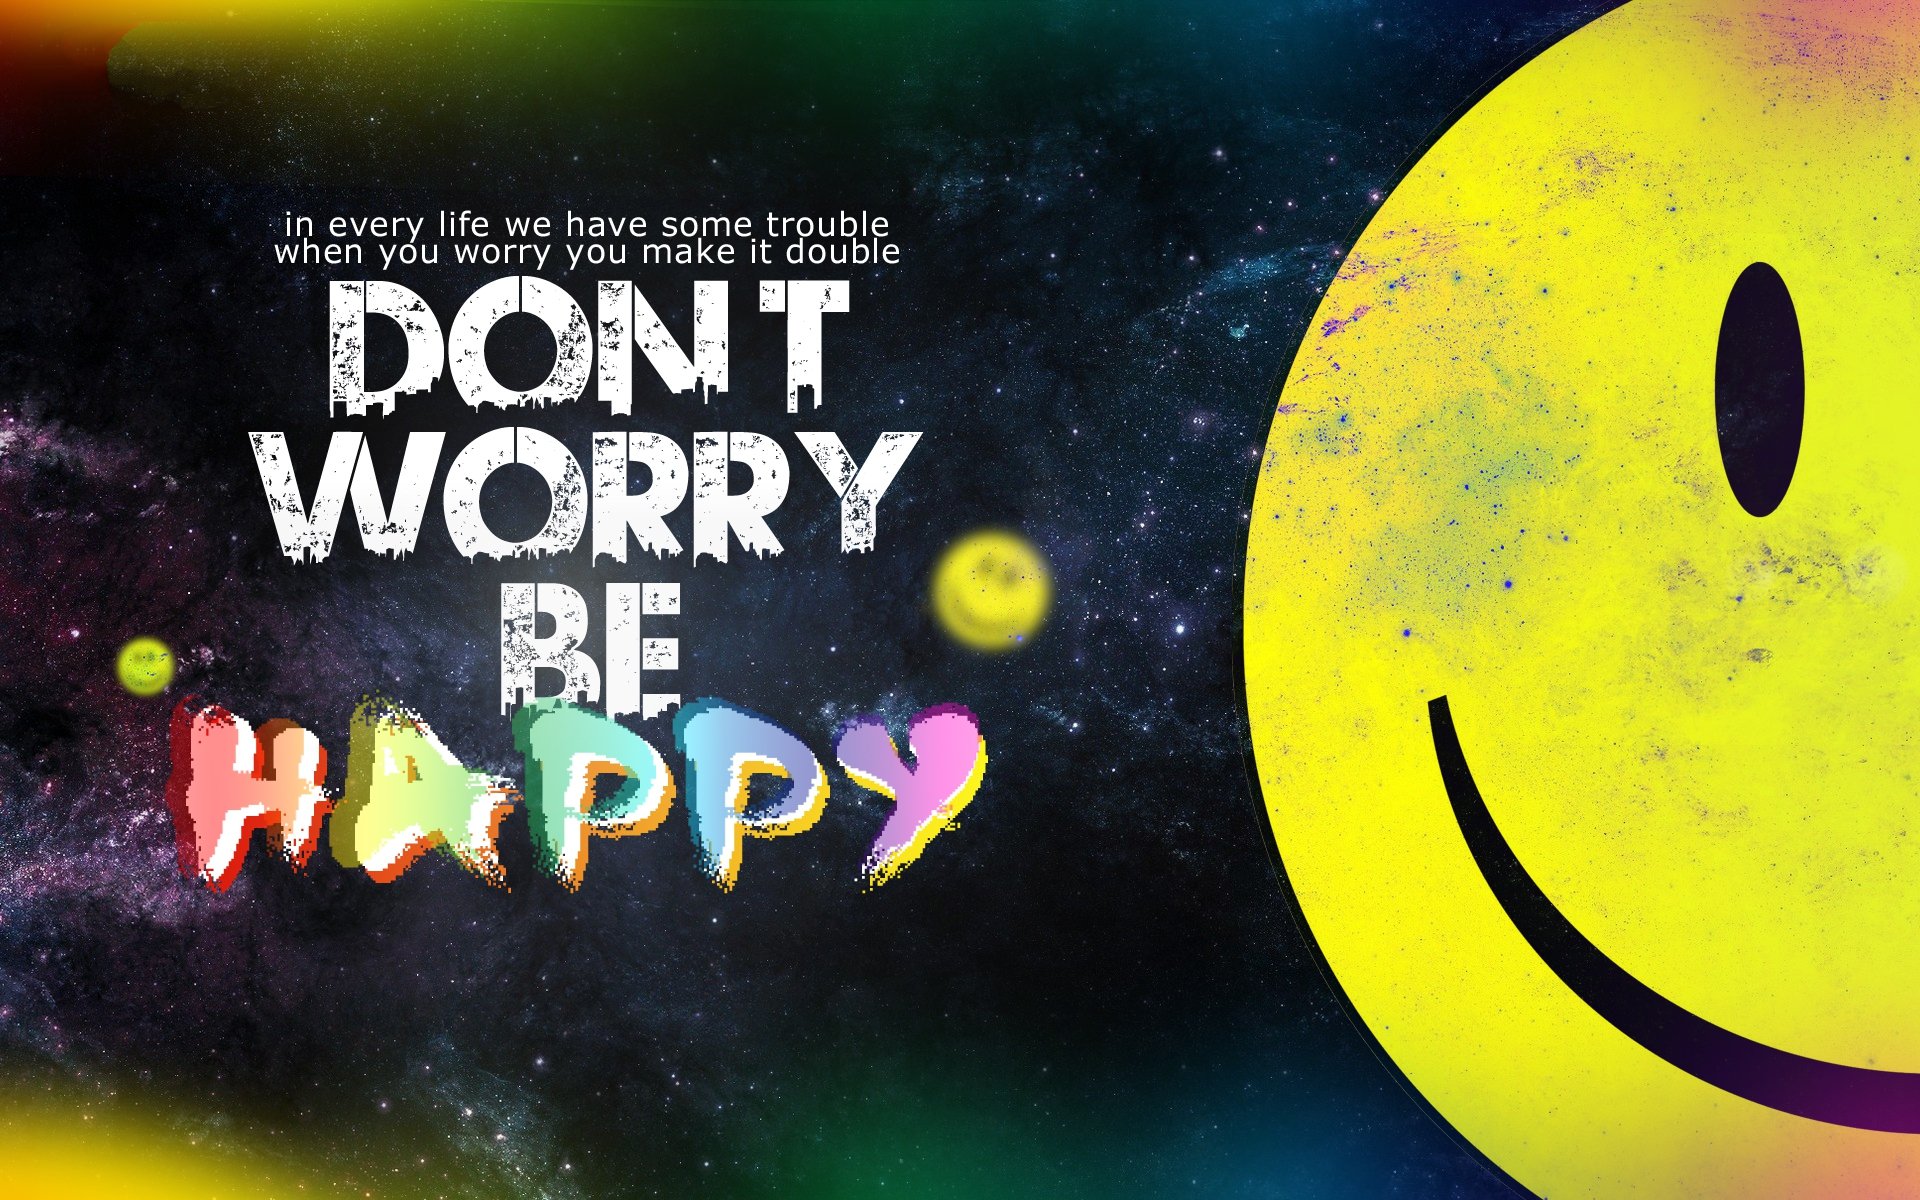 Be happy son. Don't worry be Happy. Донт вори би Хэппи. Надпись don't worry be Happy. Надпись донт вори би Хэппи.